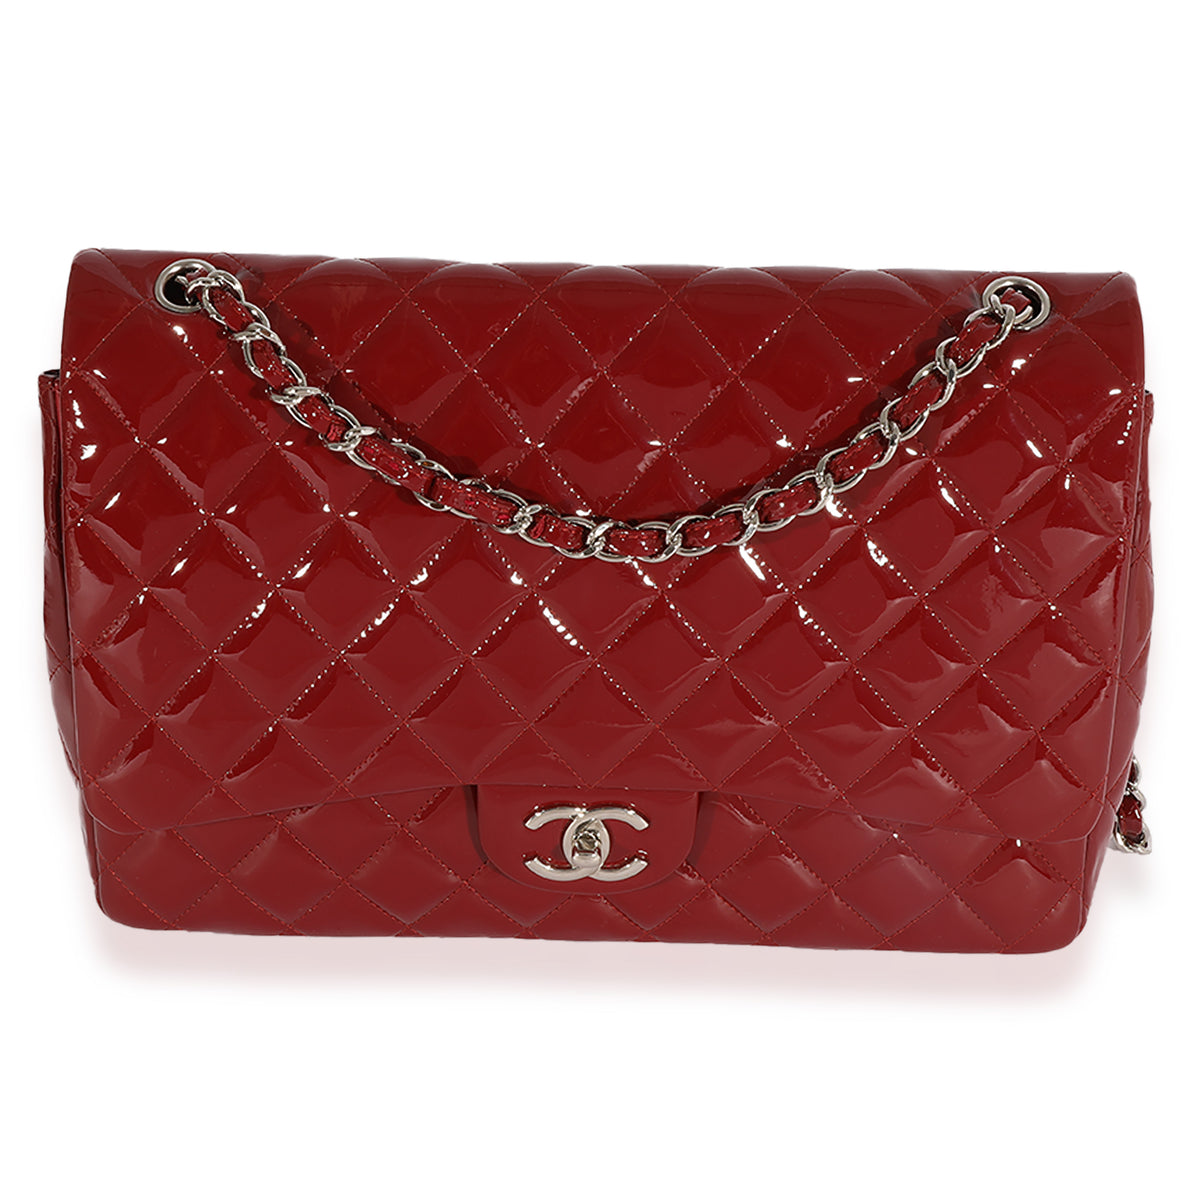 Chanel Dark Red Quilted Patent Leather Maxi Classic Double Flap Bag, myGemma, CA